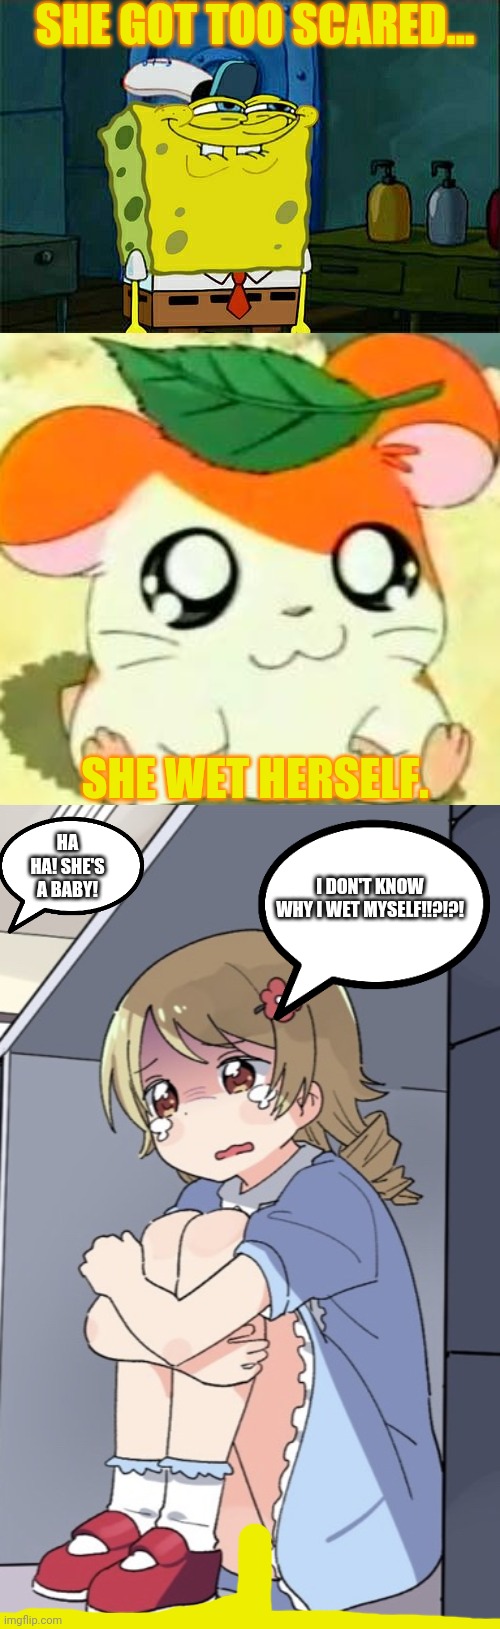 SHE GOT TOO SCARED... SHE WET HERSELF. HA HA! SHE'S A BABY! I DON'T KNOW WHY I WET MYSELF!!?!?! | image tagged in memes,dont you squidward,hamtaro,anime girl hiding from terminator | made w/ Imgflip meme maker